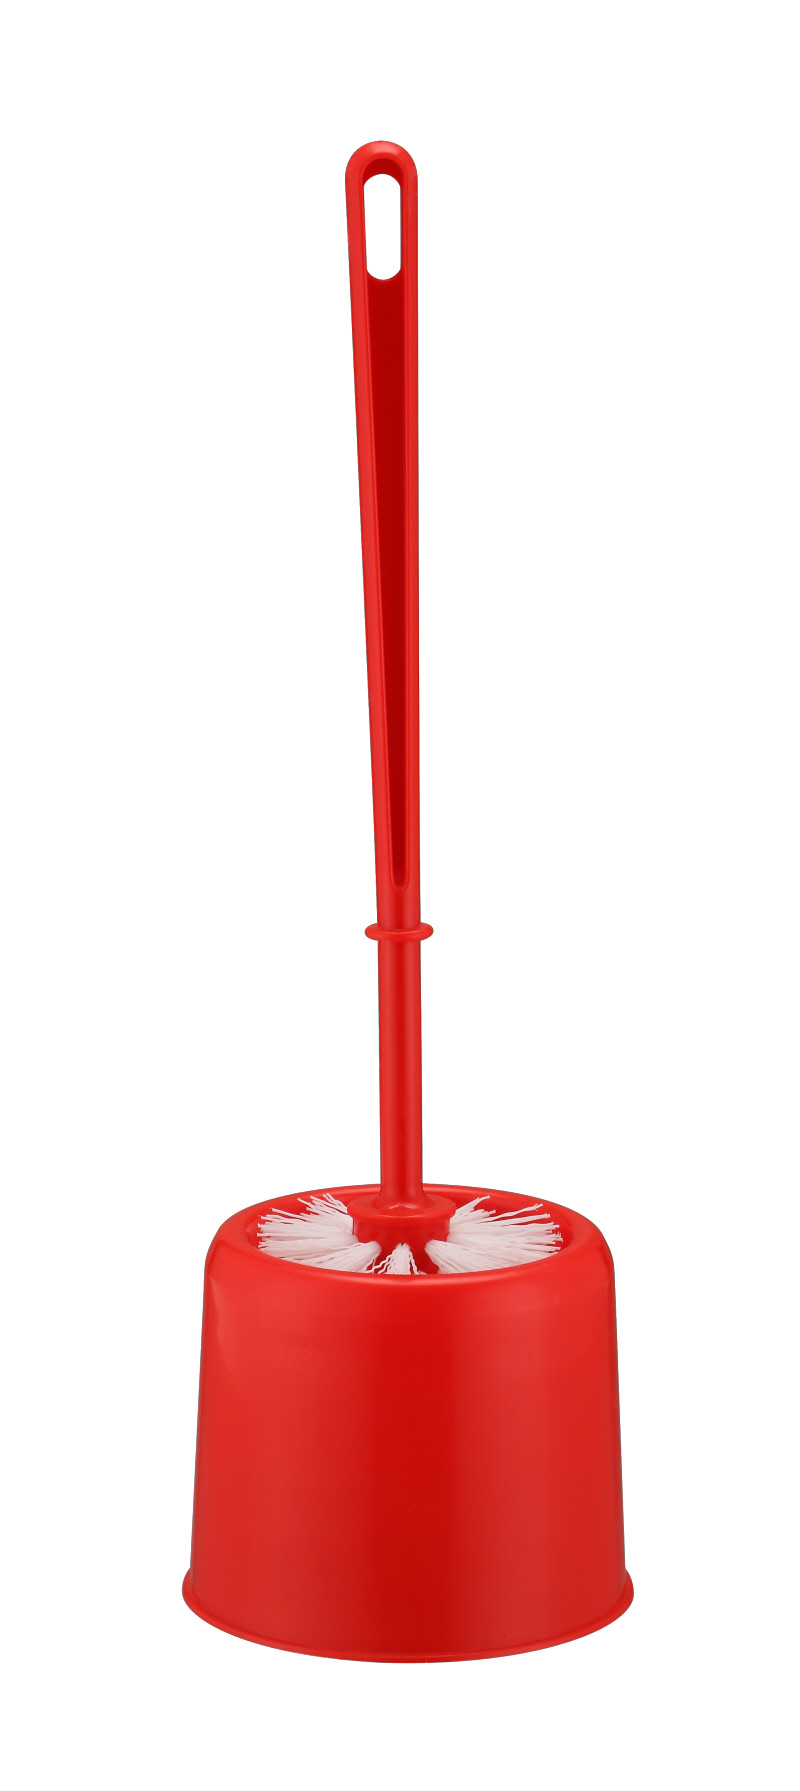 New Design by Upright Soft PET Bristle Plastic Curved Toilet Brush 9112 